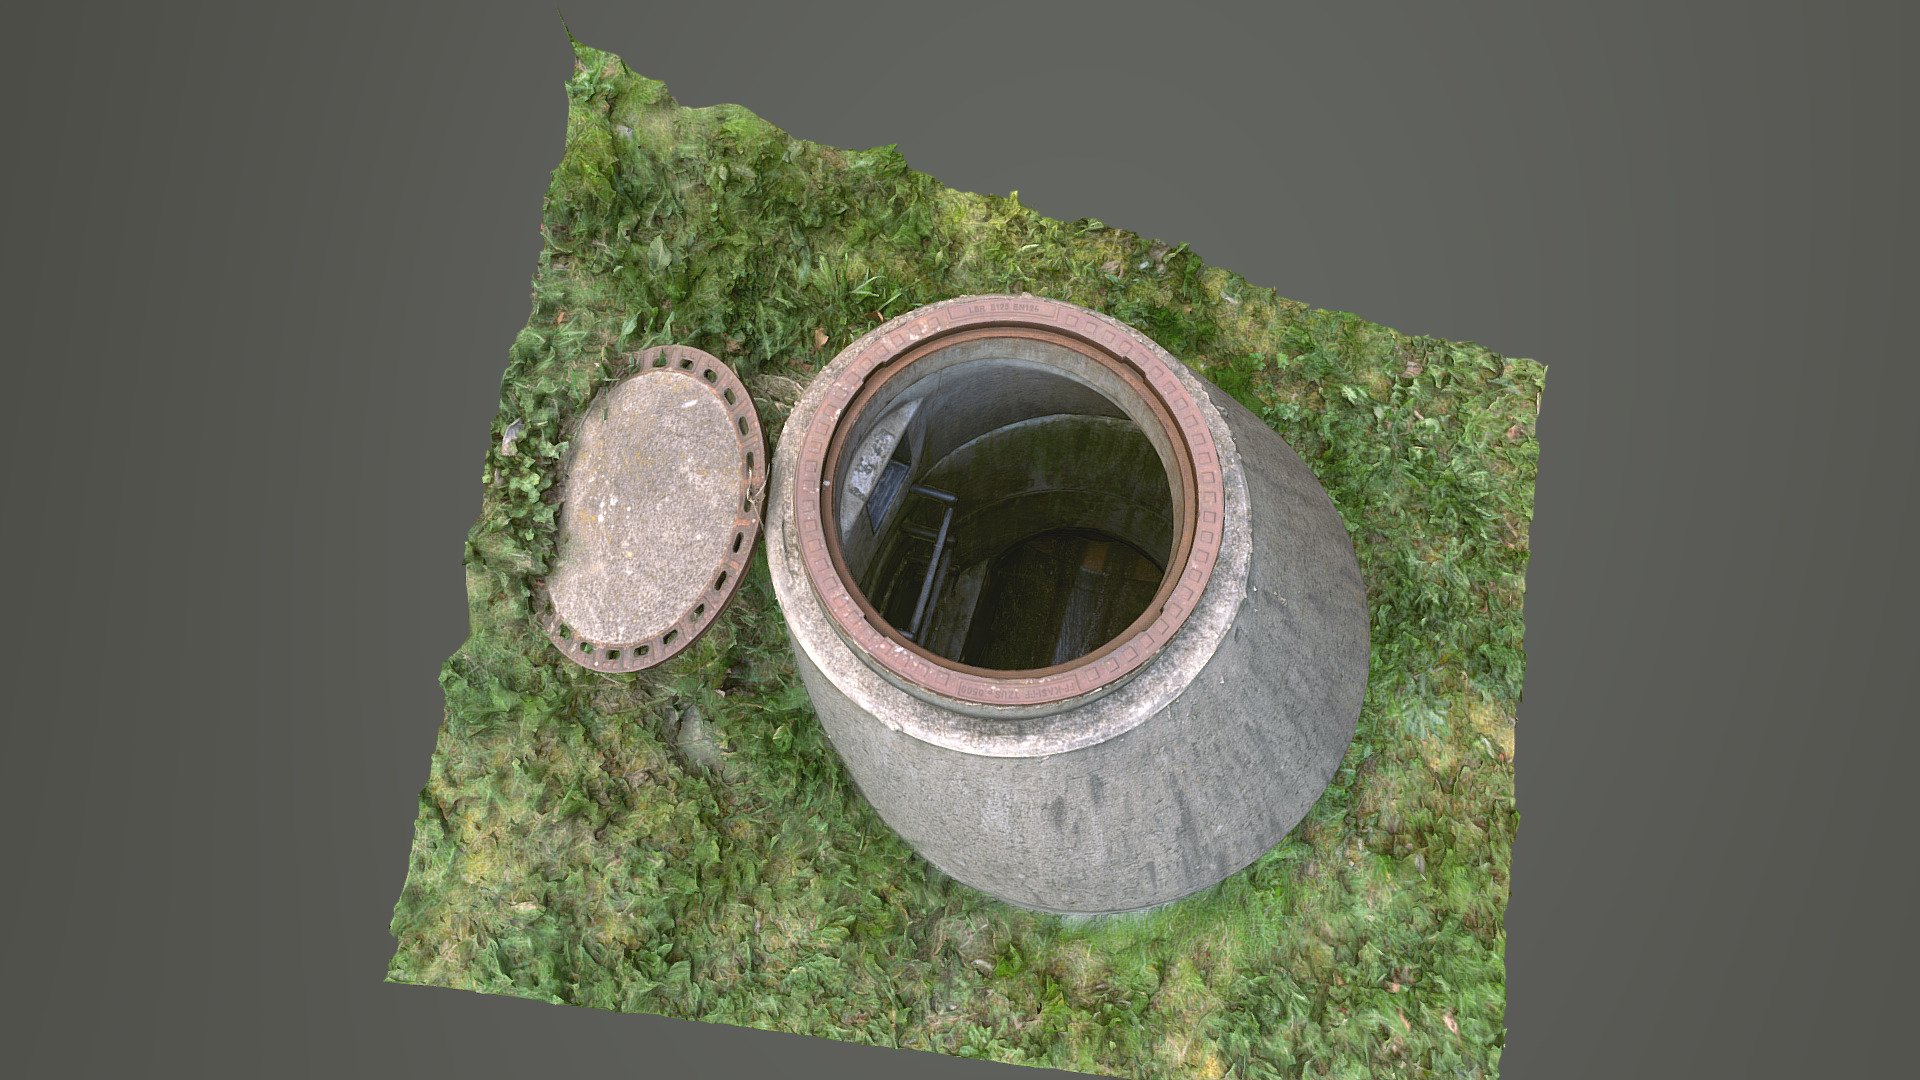 Open sewer hatch concrete manhole cover with underground interior drain canal part in a park, water flowing inside

photogrammetry scan (260 x 24MP) - Sewer hatch concrete cover with underground part - Buy Royalty Free 3D model by matousekfoto 3d model